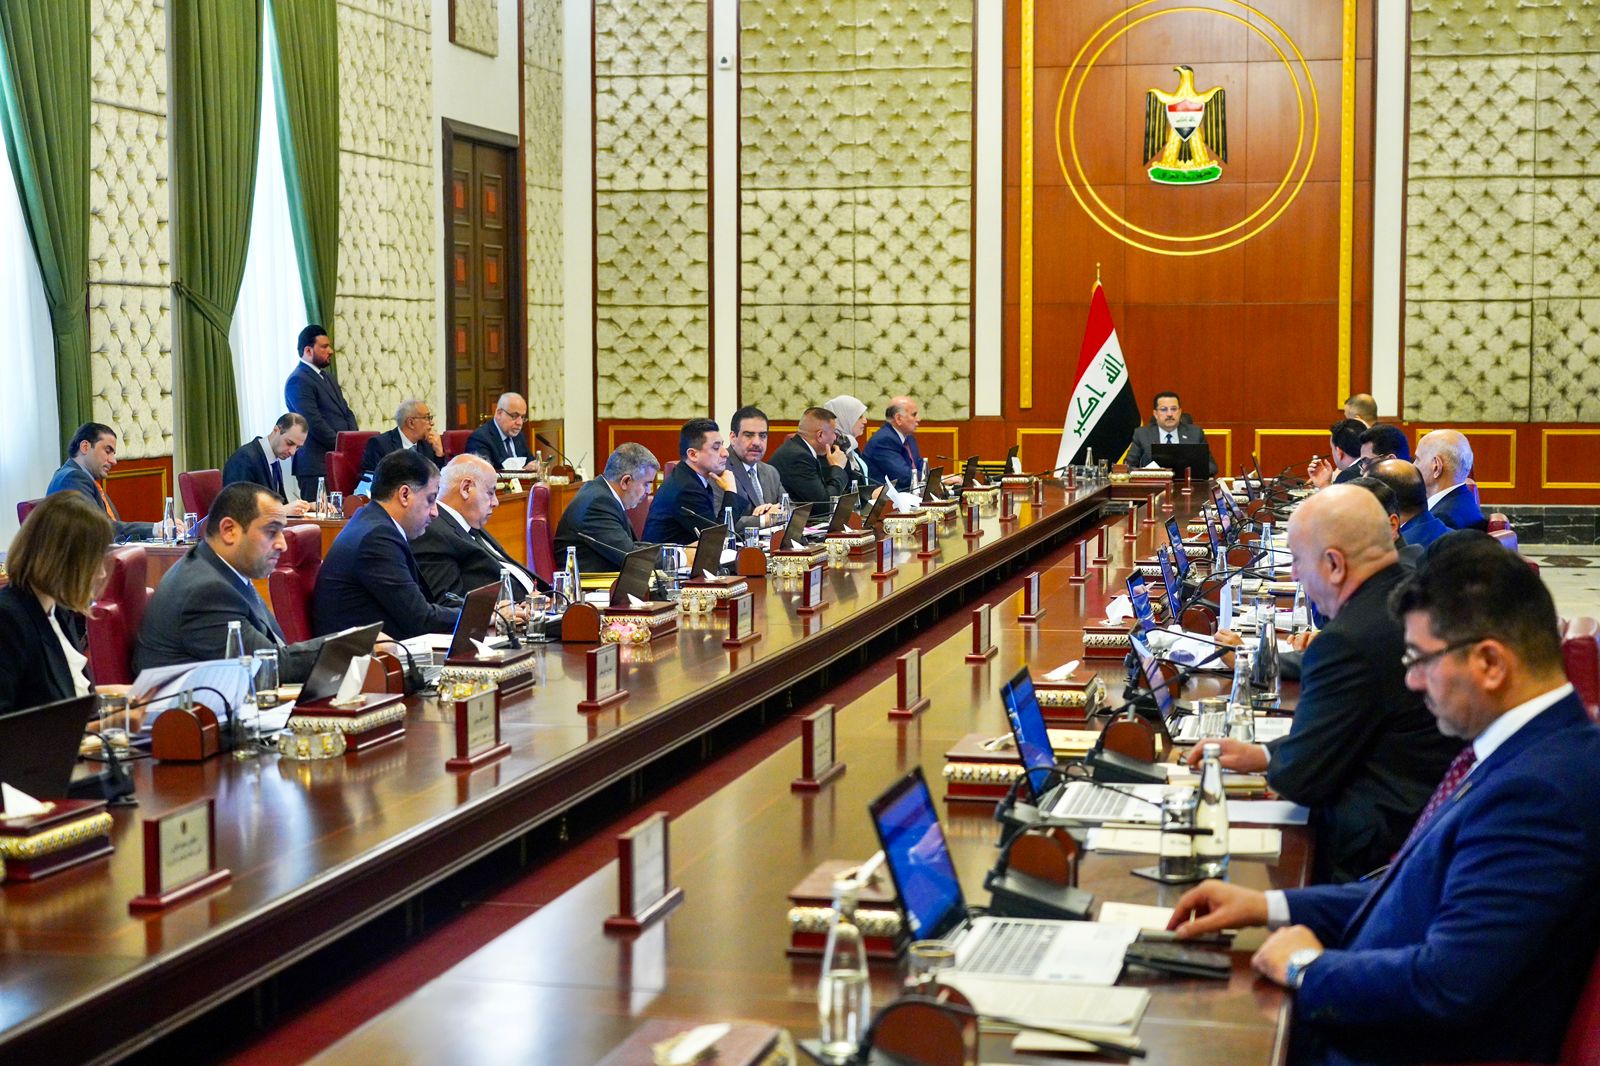 Iraqi Council of Ministers Holds 24th Regular Session, Discusses Key Issues, and Makes Decisions